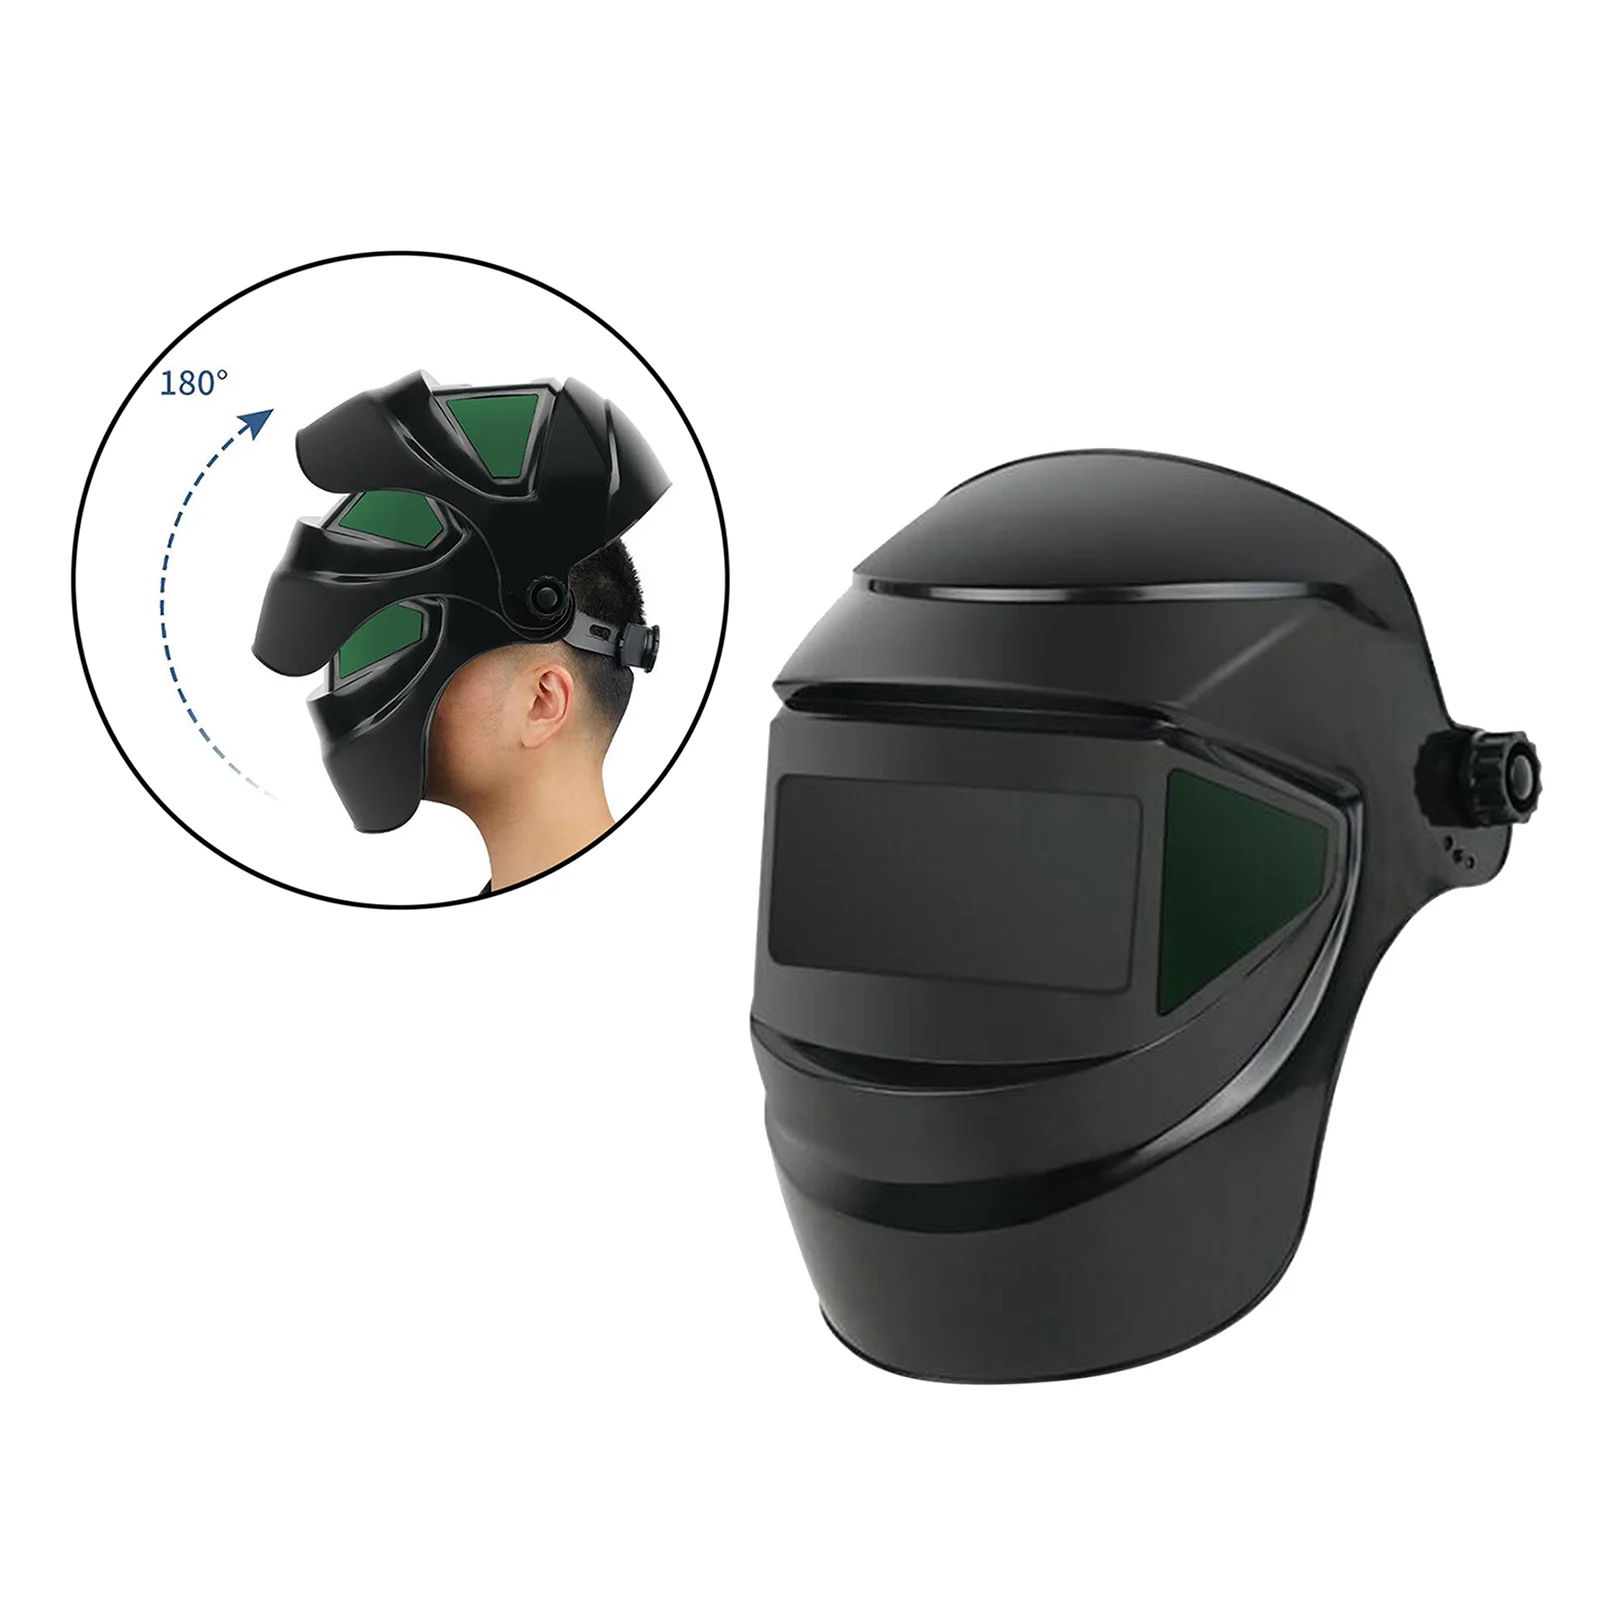 s Large View True Color Welding Helmets Mask Hood   Shade Eyes Goggles Protectors Power Grinding